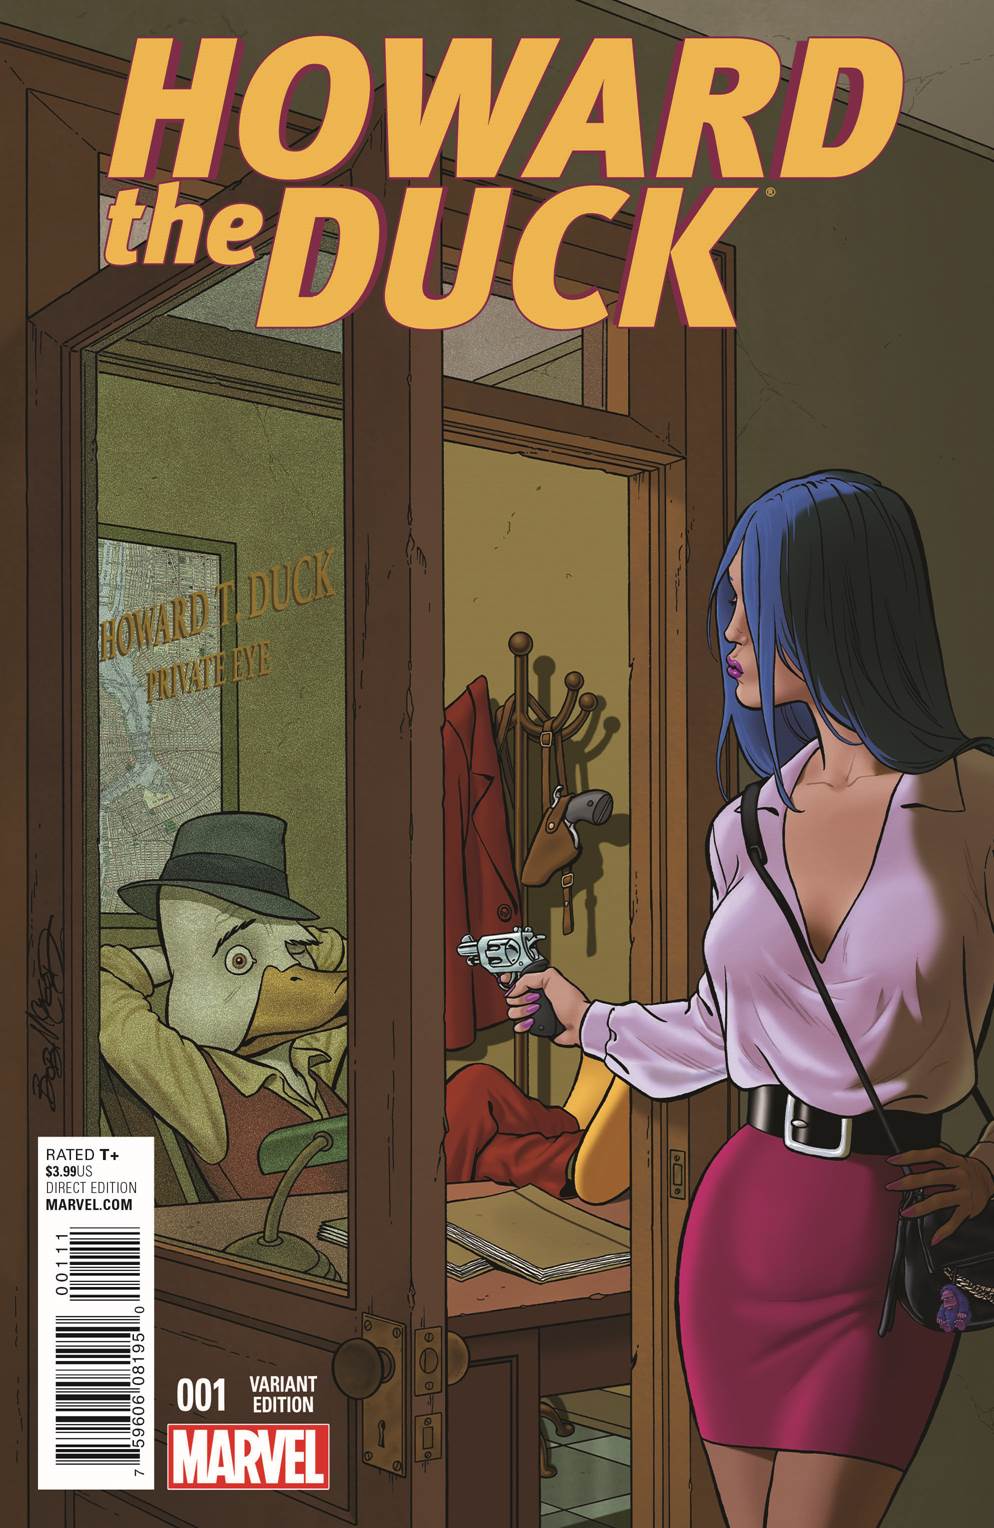 Howard the Duck #1 2nd Print GwenPool Back Up Feature Marvel Comics Late 2015 